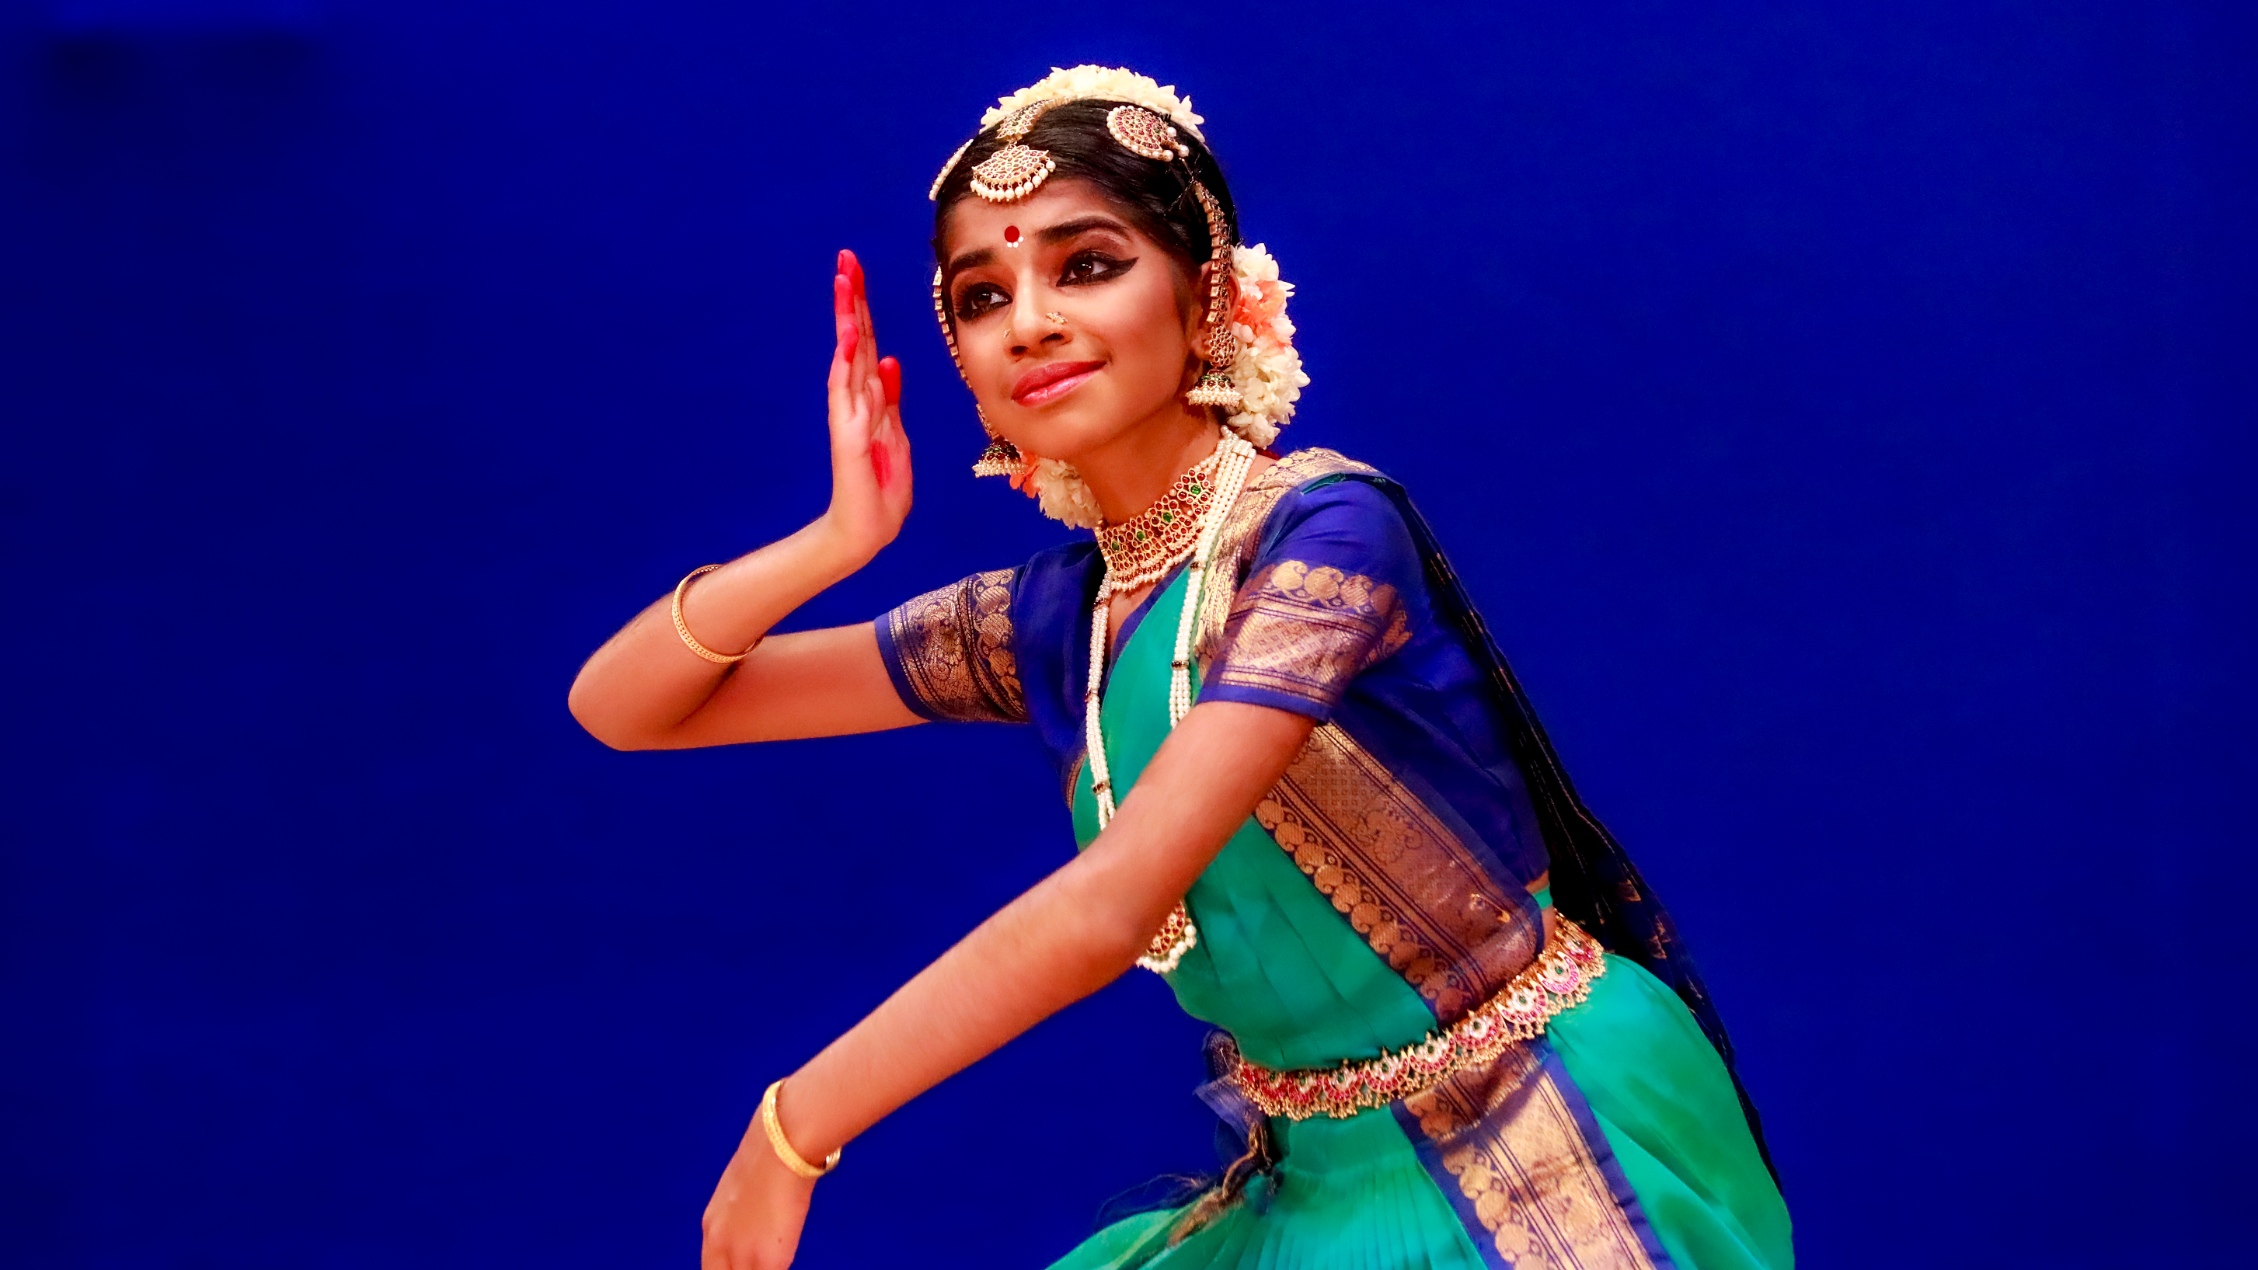 Pin by Hawa on Bollywood | Indian classical dancer, Indian dance, Dance of  india